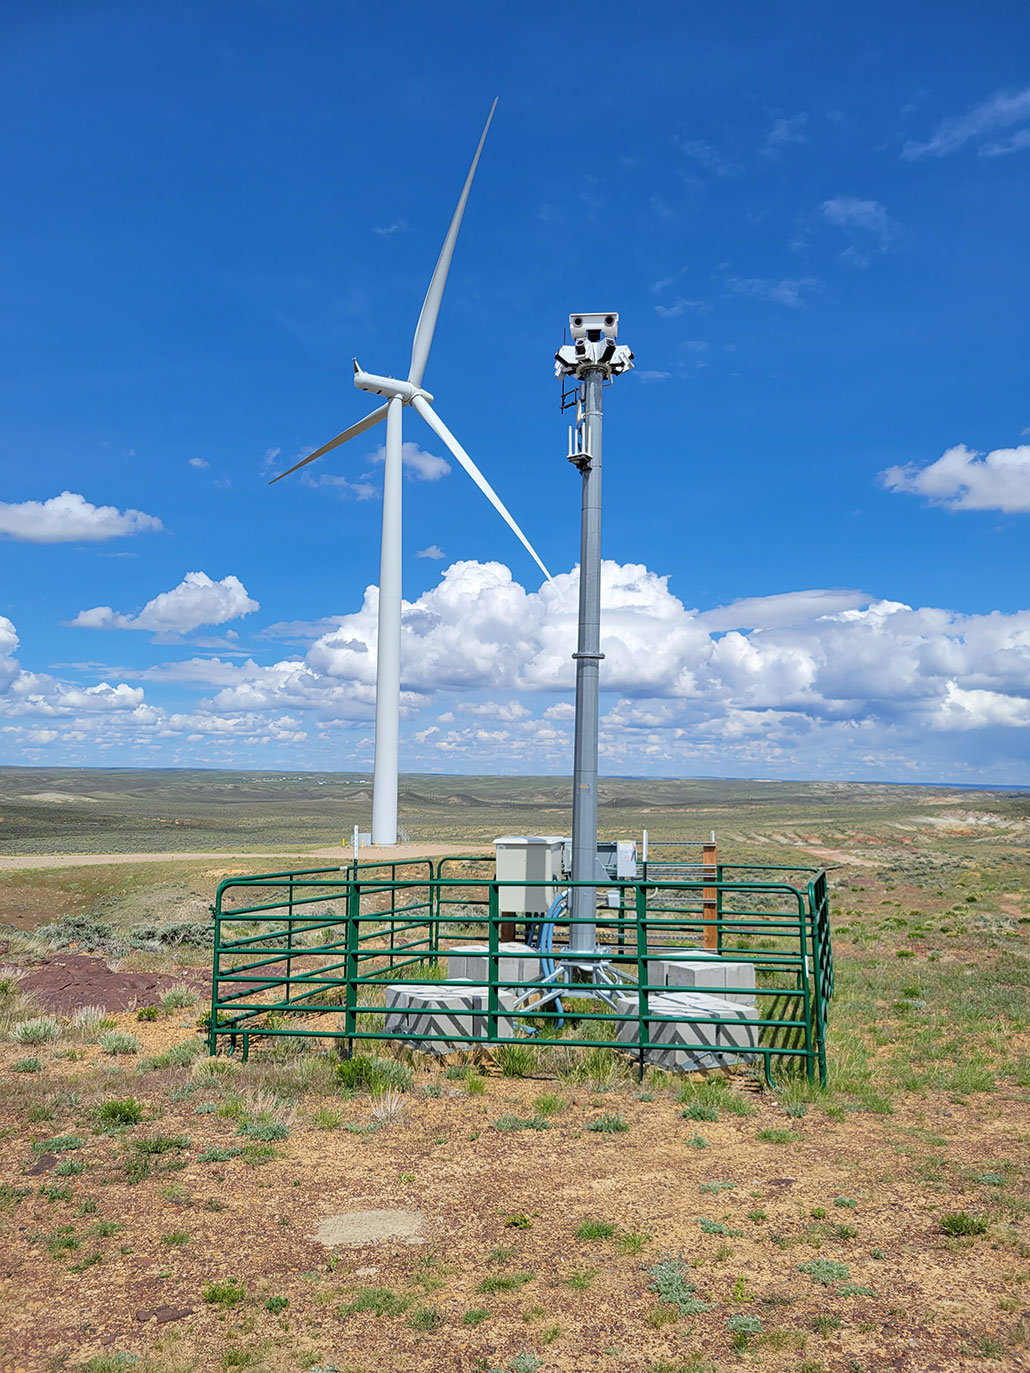 A wind turbine is in the distance, the landscape is flat and scrubby. In the foreground a green metal fence surrounds a small tower equipped with cameras.